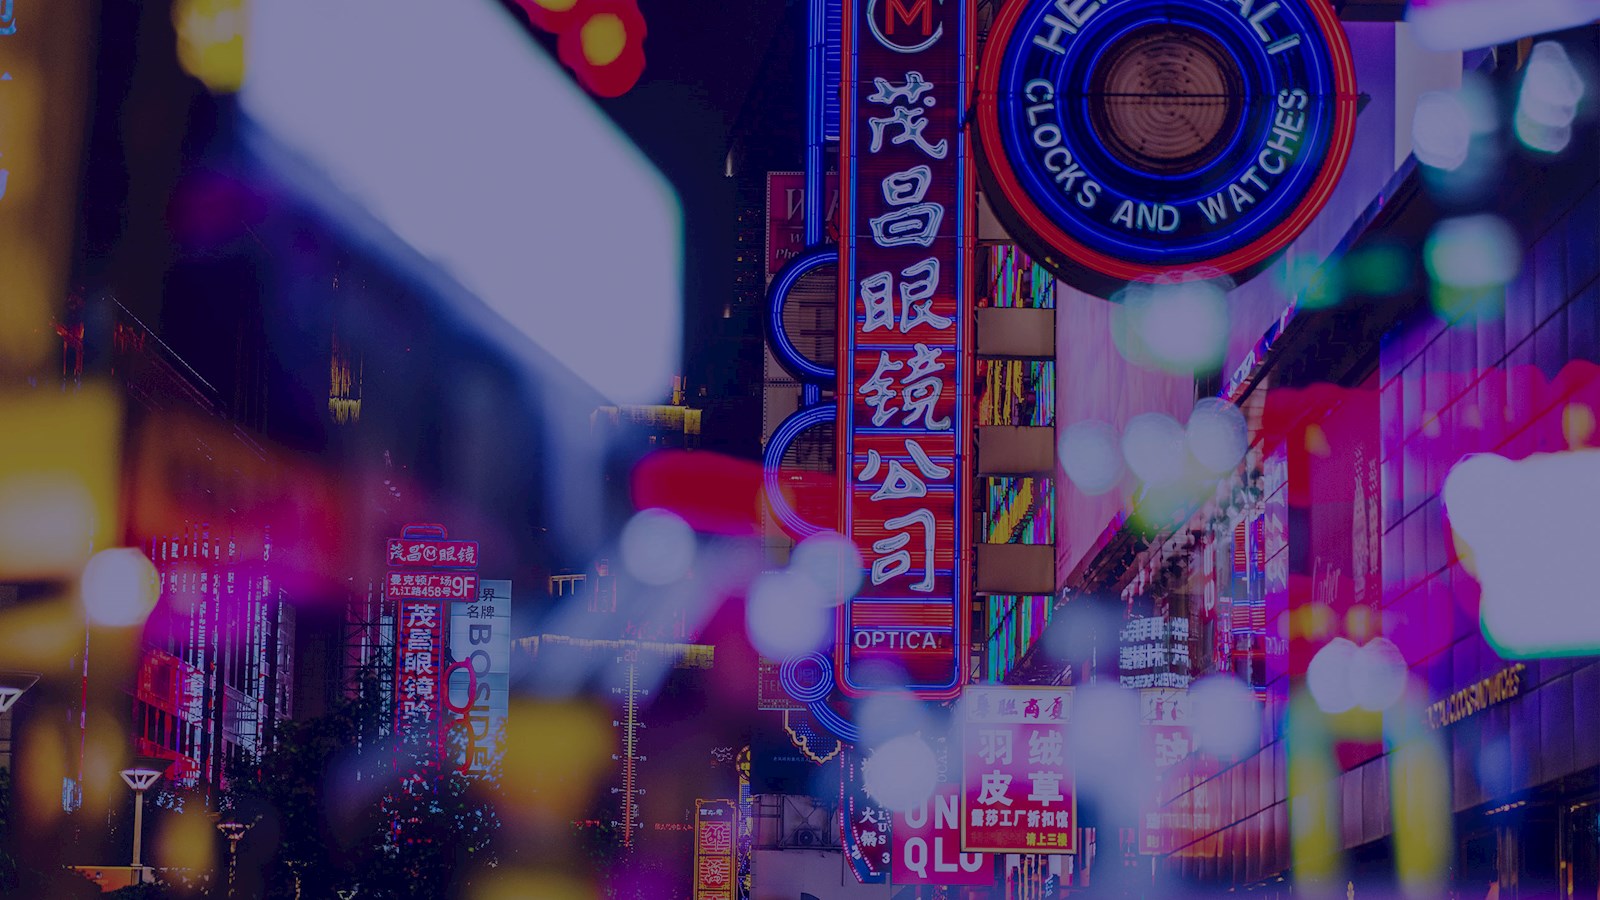 Photograph of a street in China with lots of bright lights and shop signs